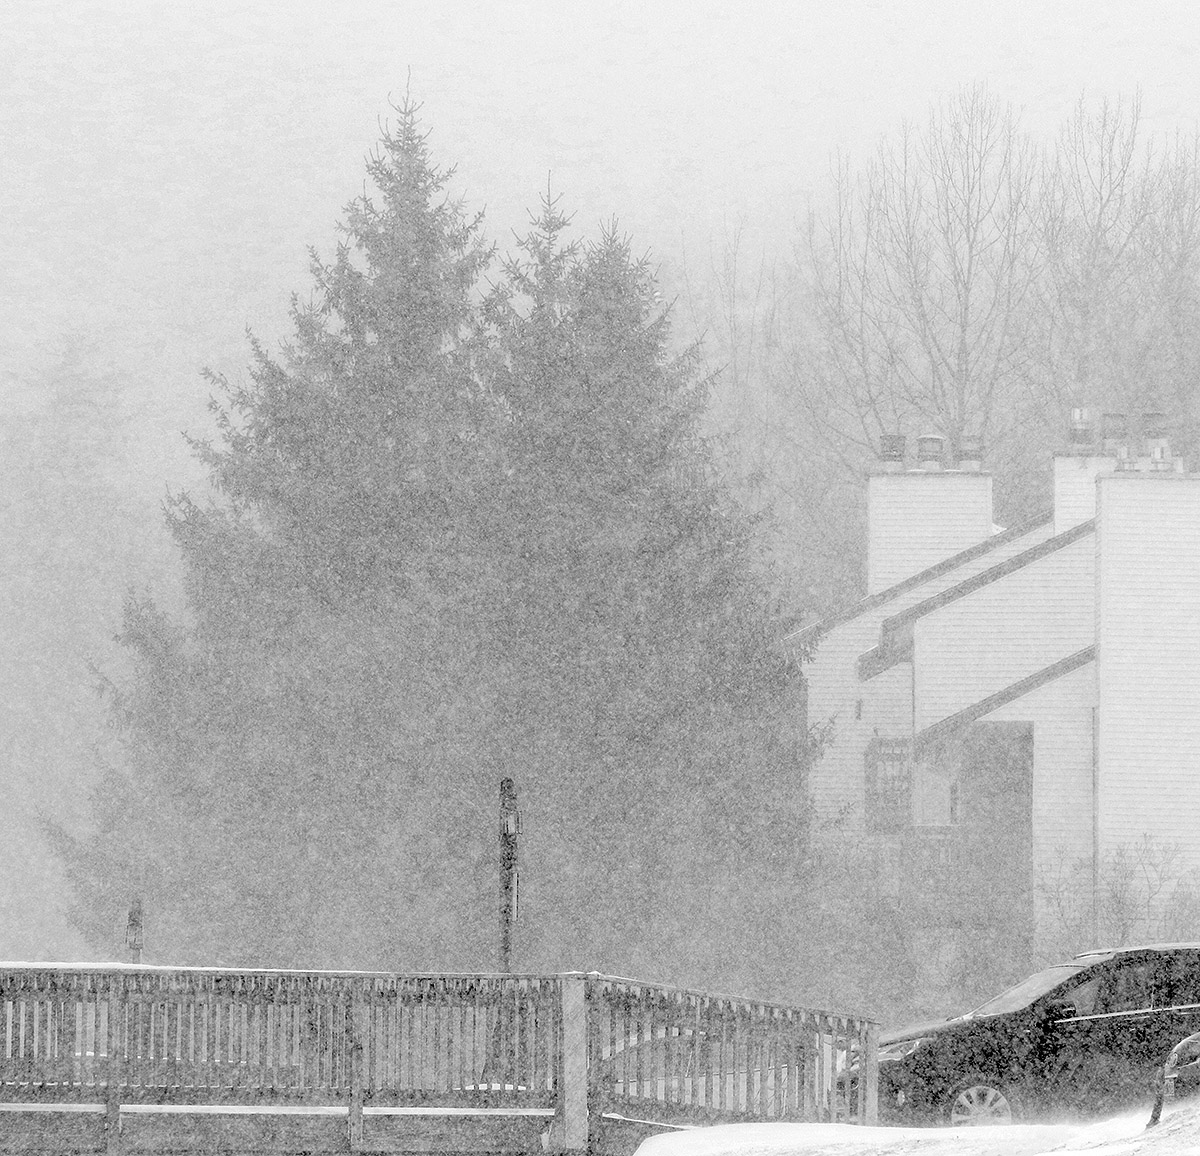 An image of heavy snowfall taking place during a March snowstorm in the village area of Bolton Valley Ski Resort in Vermont